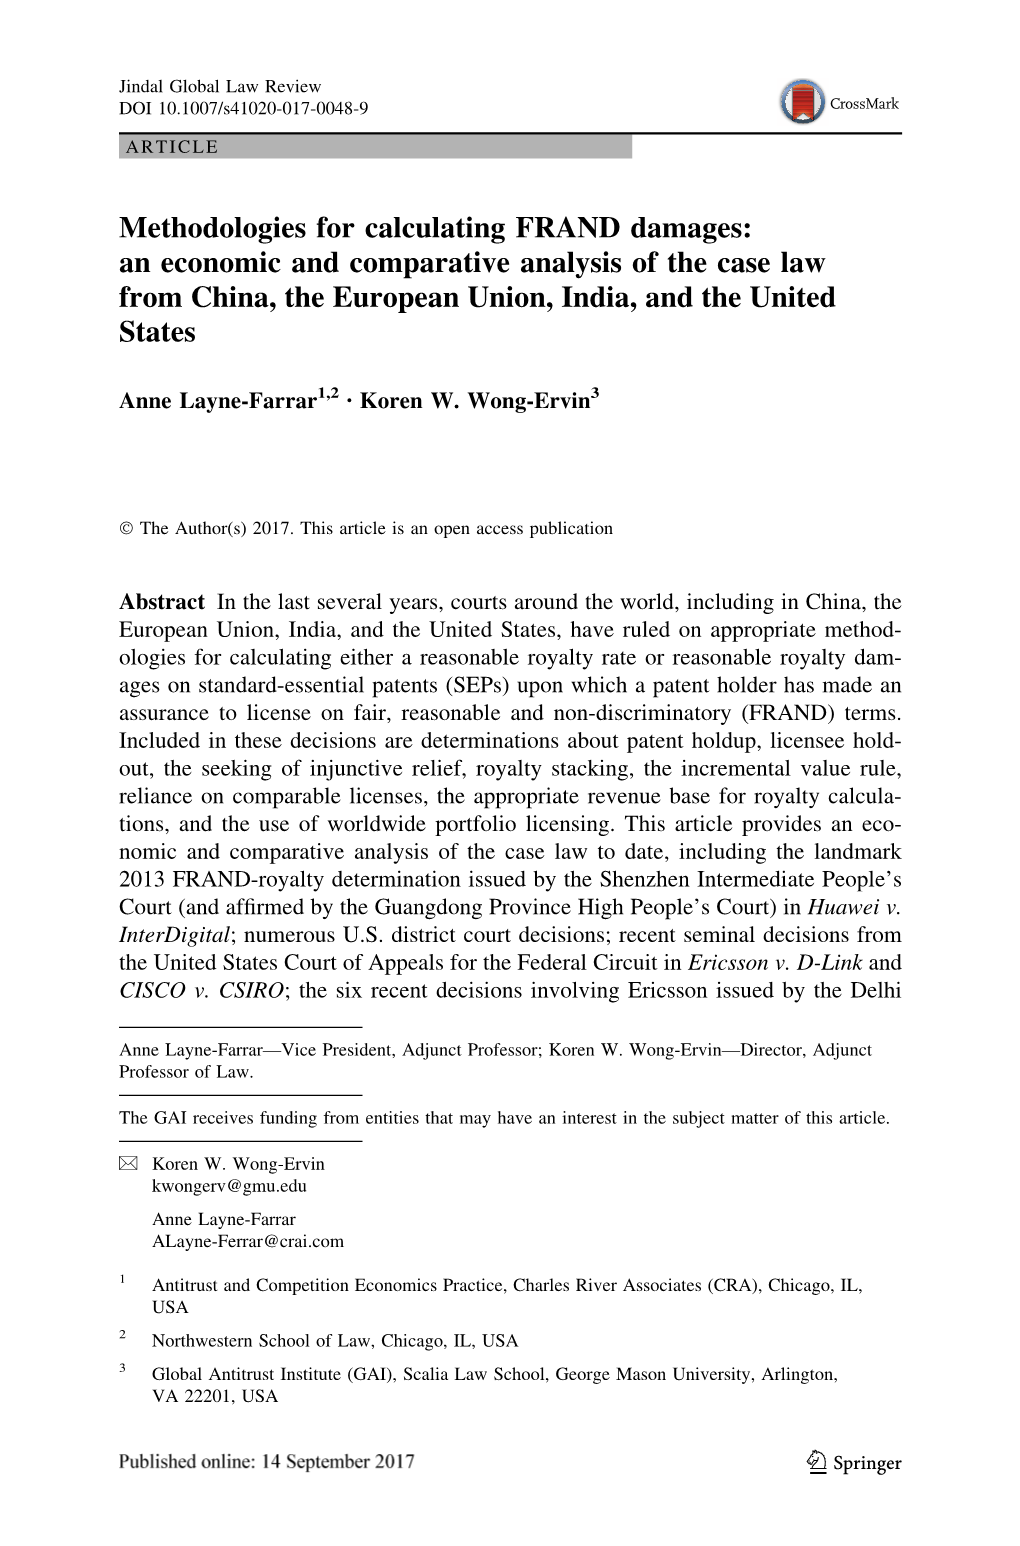 Methodologies for Calculating FRAND Damages: an Economic and Comparative Analysis of the Case Law from China, the European Union, India, and the United States